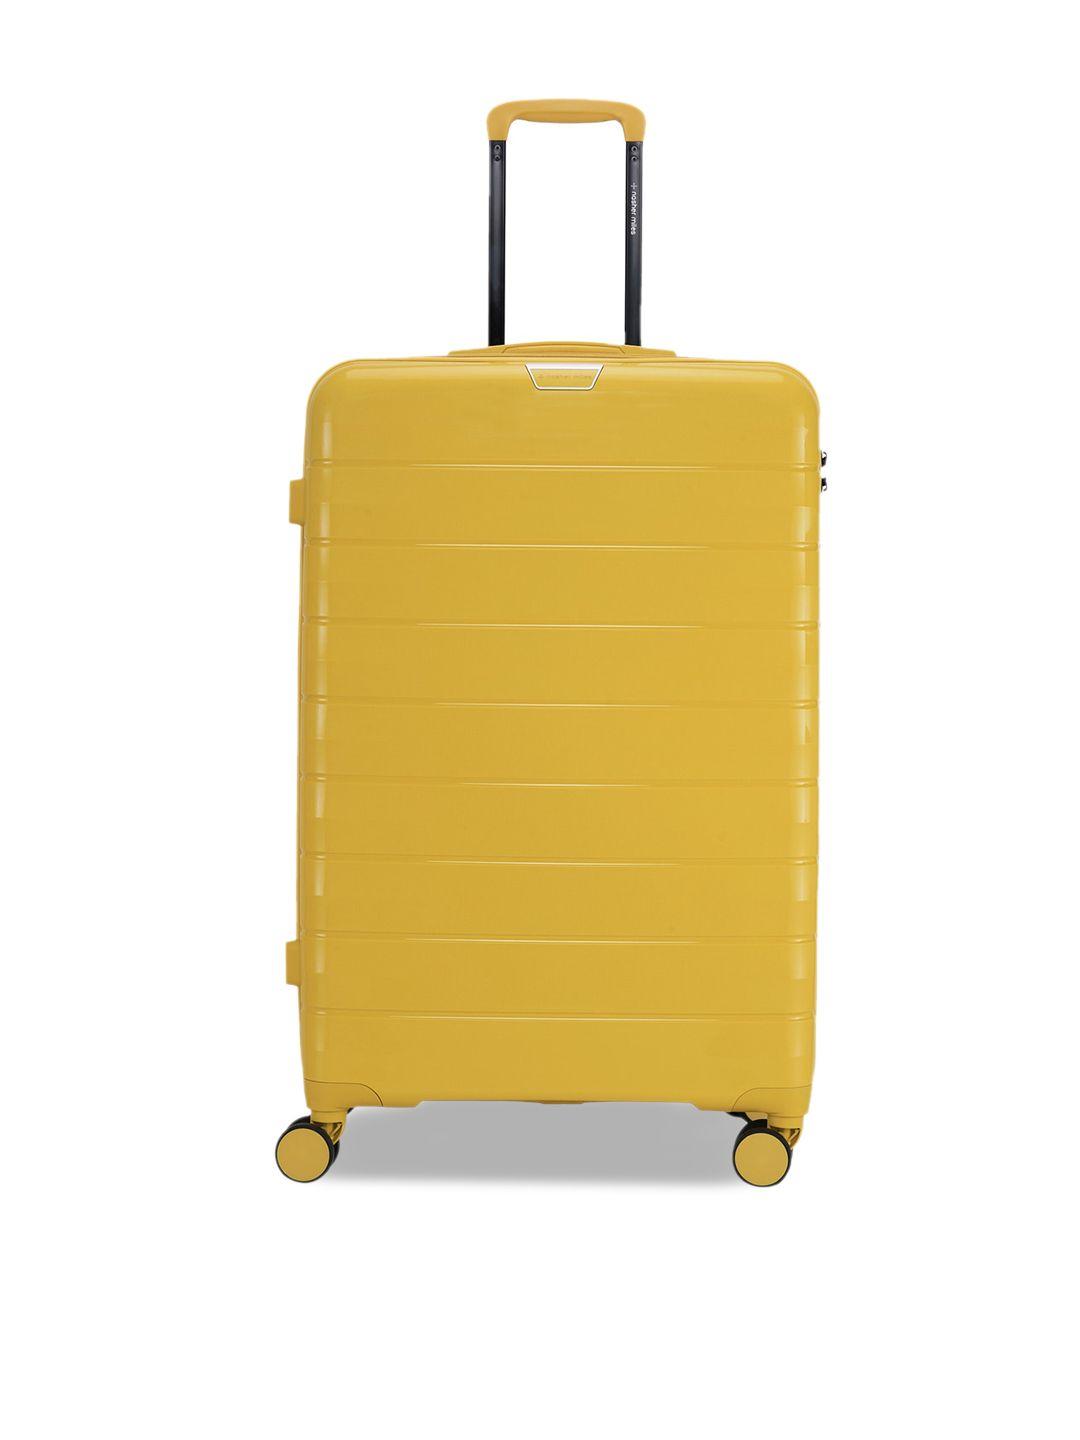 nasher miles vienna hard-sided large trolley suitcase - 75 cm